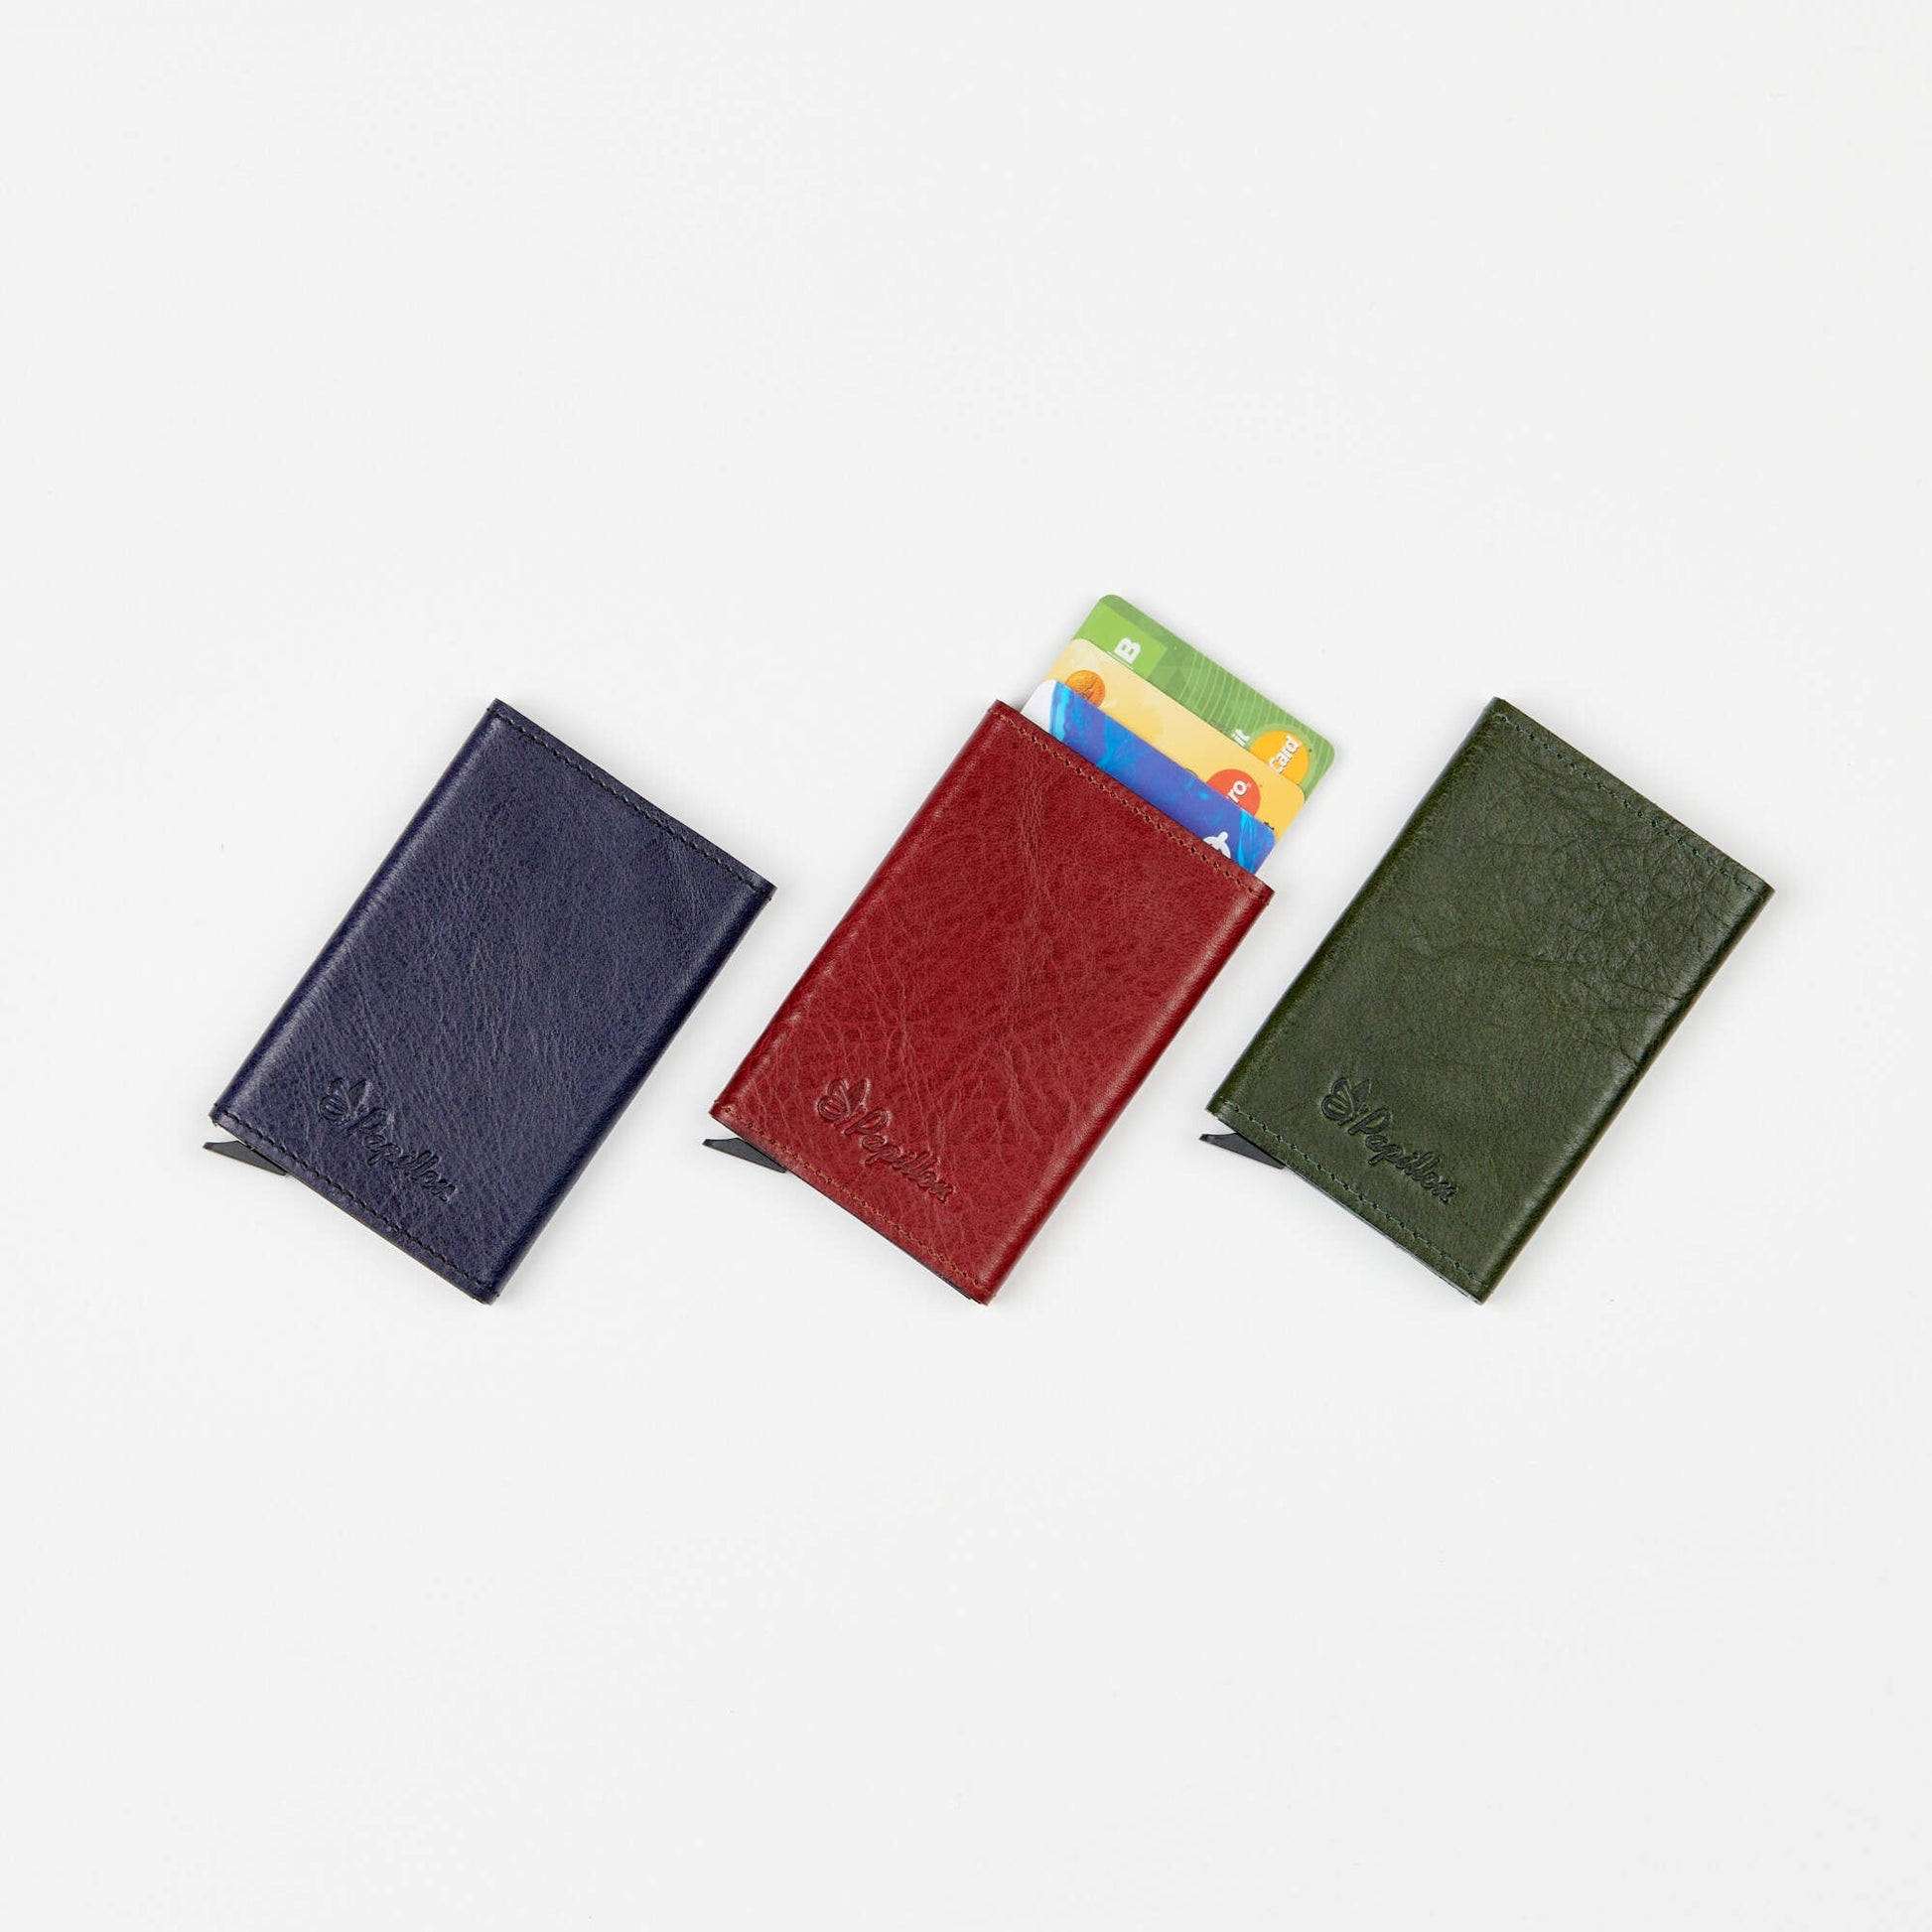 Card Holder (6 Cards) - Leather and Aluminum. Genuine leather and sturdy aluminum protect your cards from unauthorized scanning. Holds up to 6 cards with easy access. Crafted with meticulous European craftsmanship. Dimensions: 10 x 6.5 x 1cm. From Men In Style.